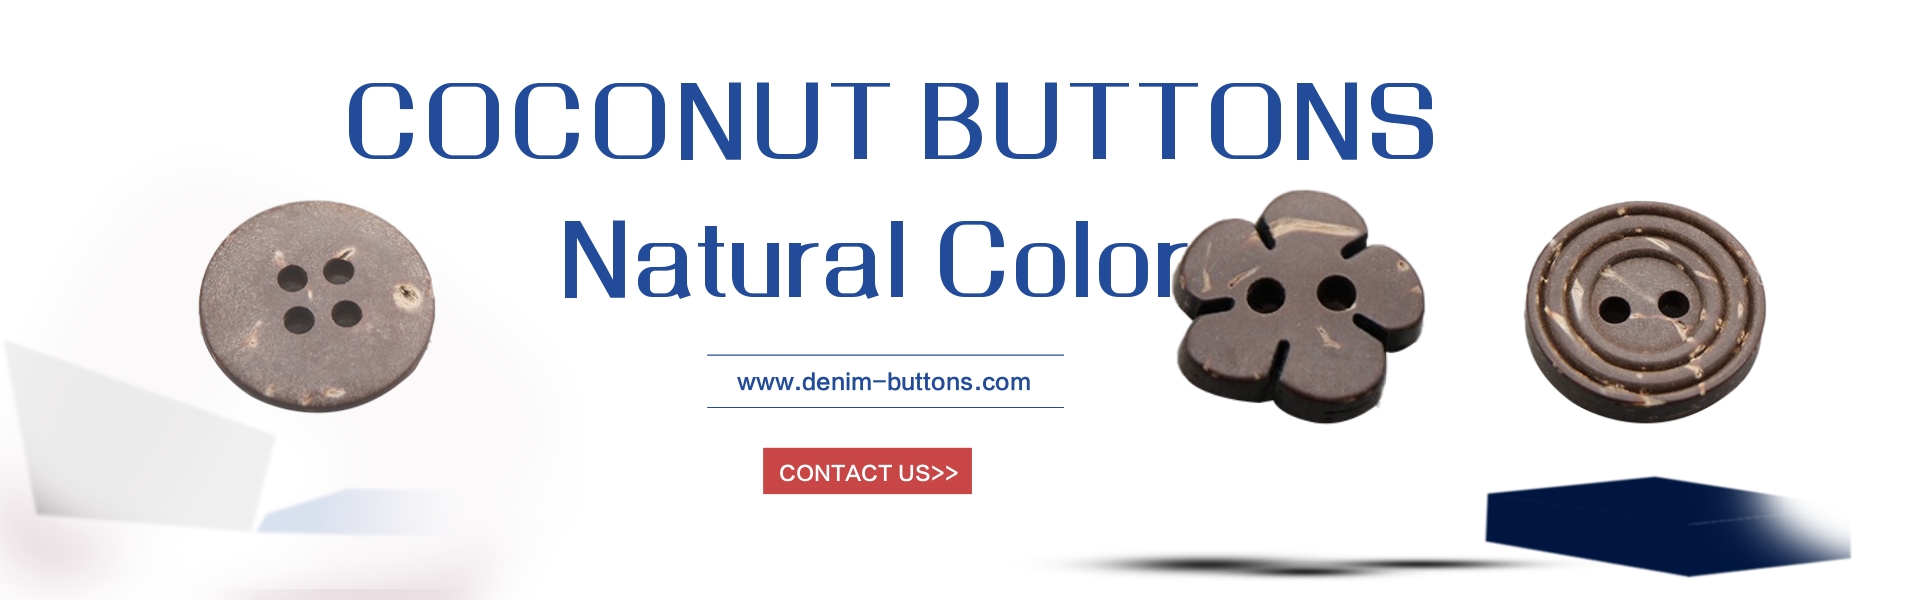 NATURAL COCONUT BUTTONS